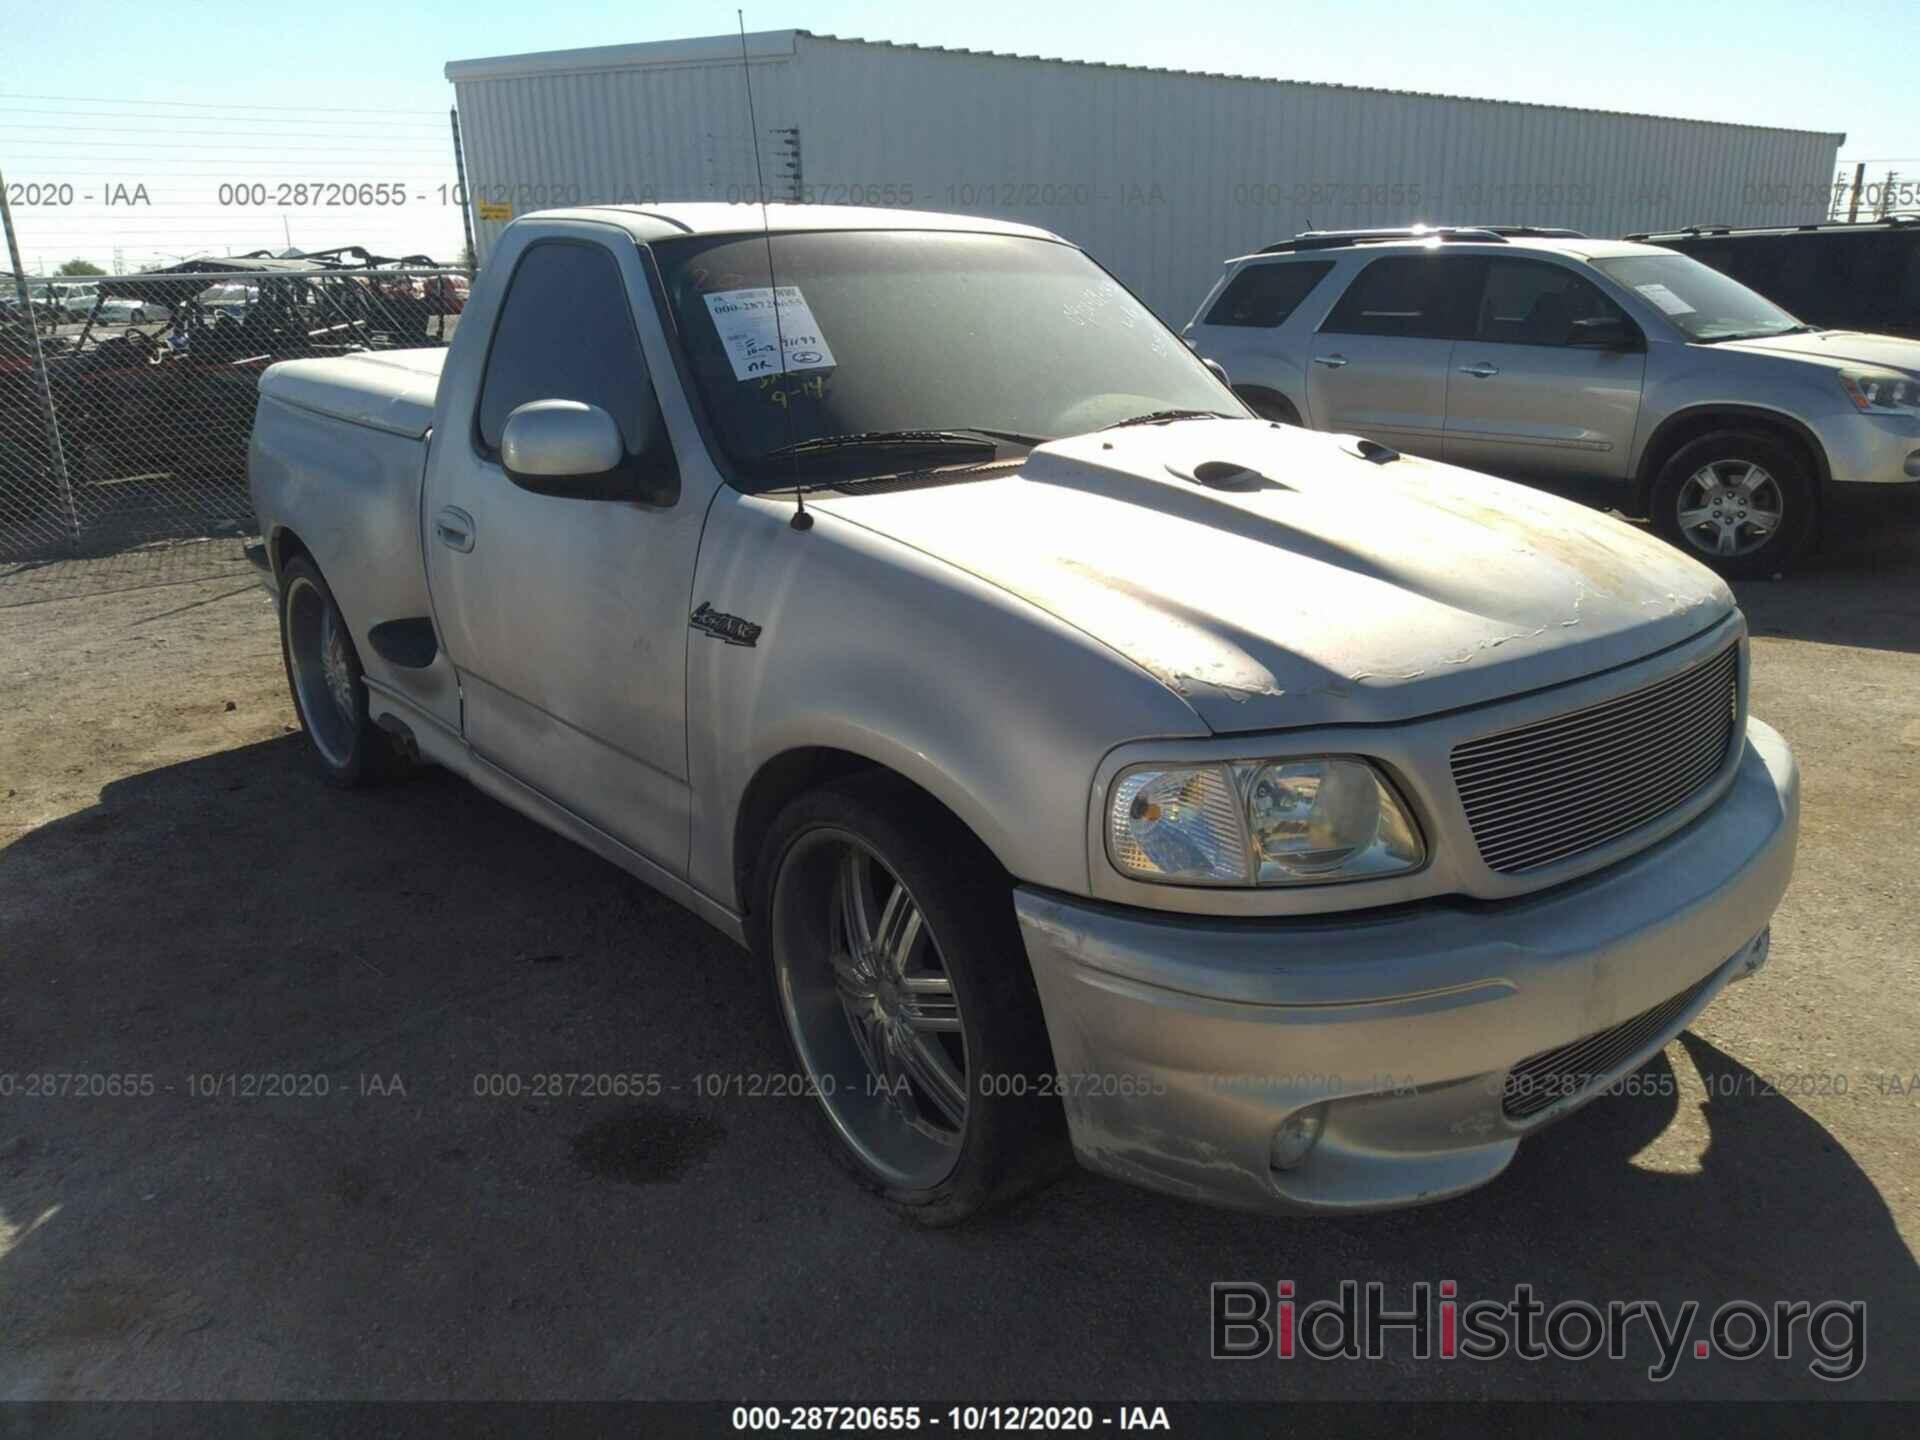 Photo 2FTZF0739YCB07509 - FORD F-150 2000